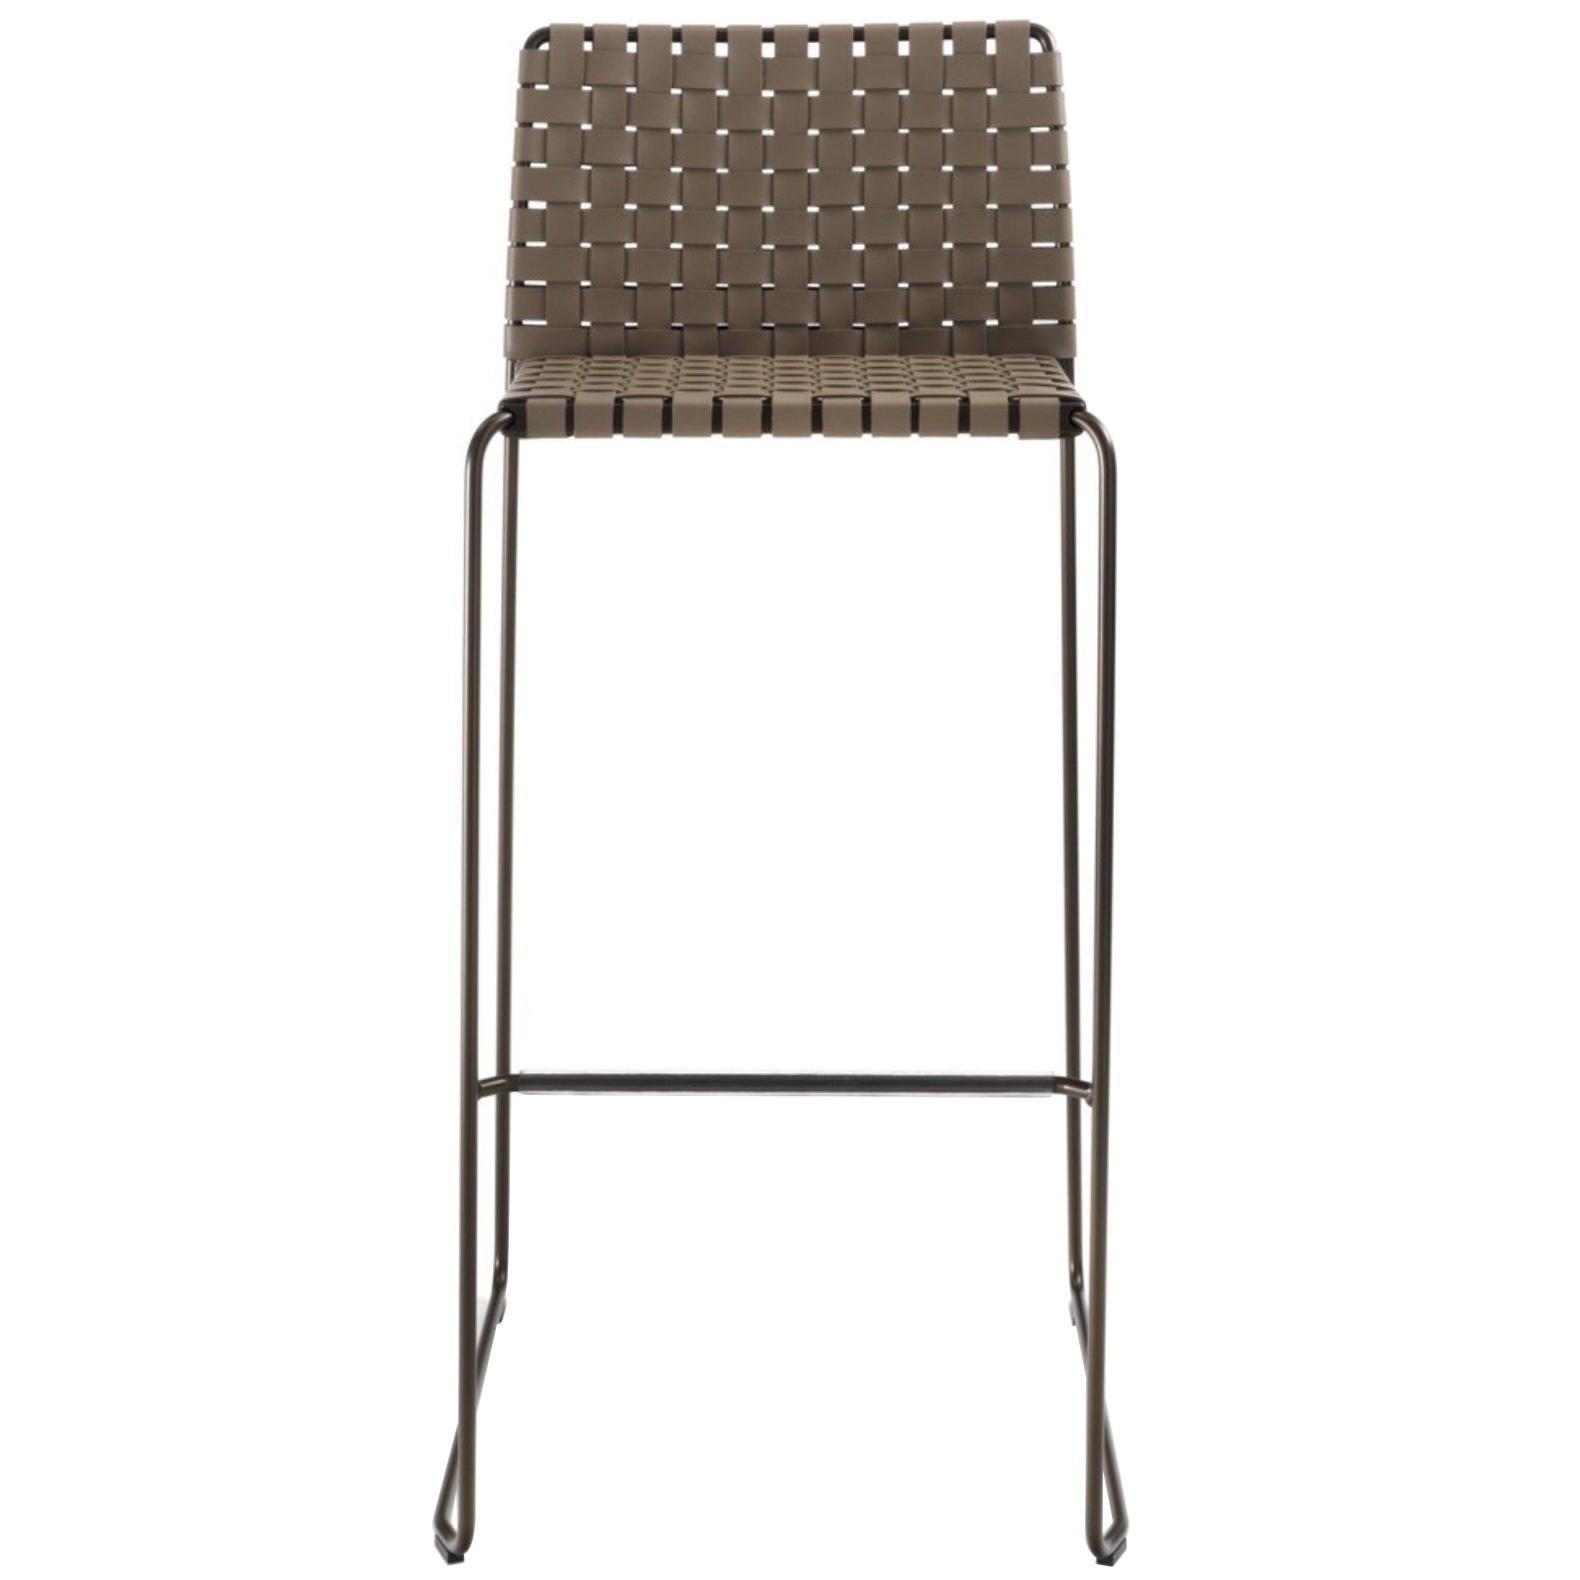 Italian woven leather modern counter or bar stool. Chrome or painted steel frame finished aluminum, matte white, bronze, matte black or raw natural, in round section, with seat and back covered with woven leather. Metal seat pan. High quality